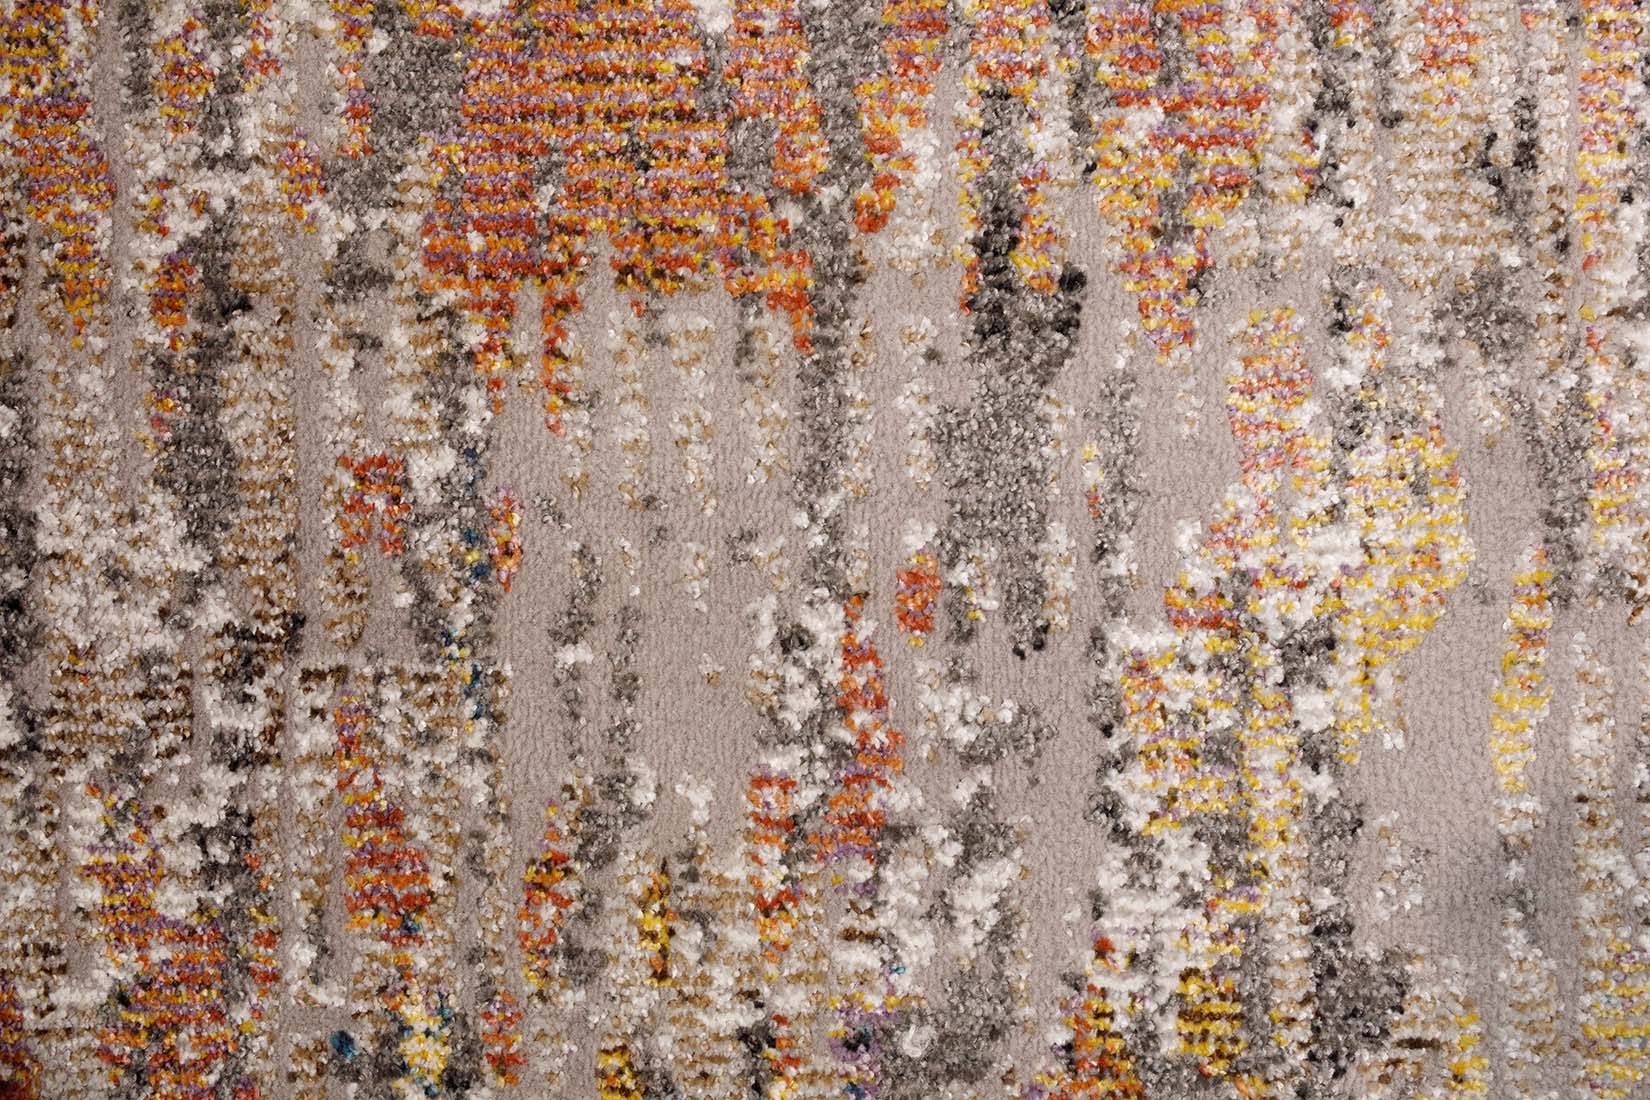 abstract area rug with multicolour design
